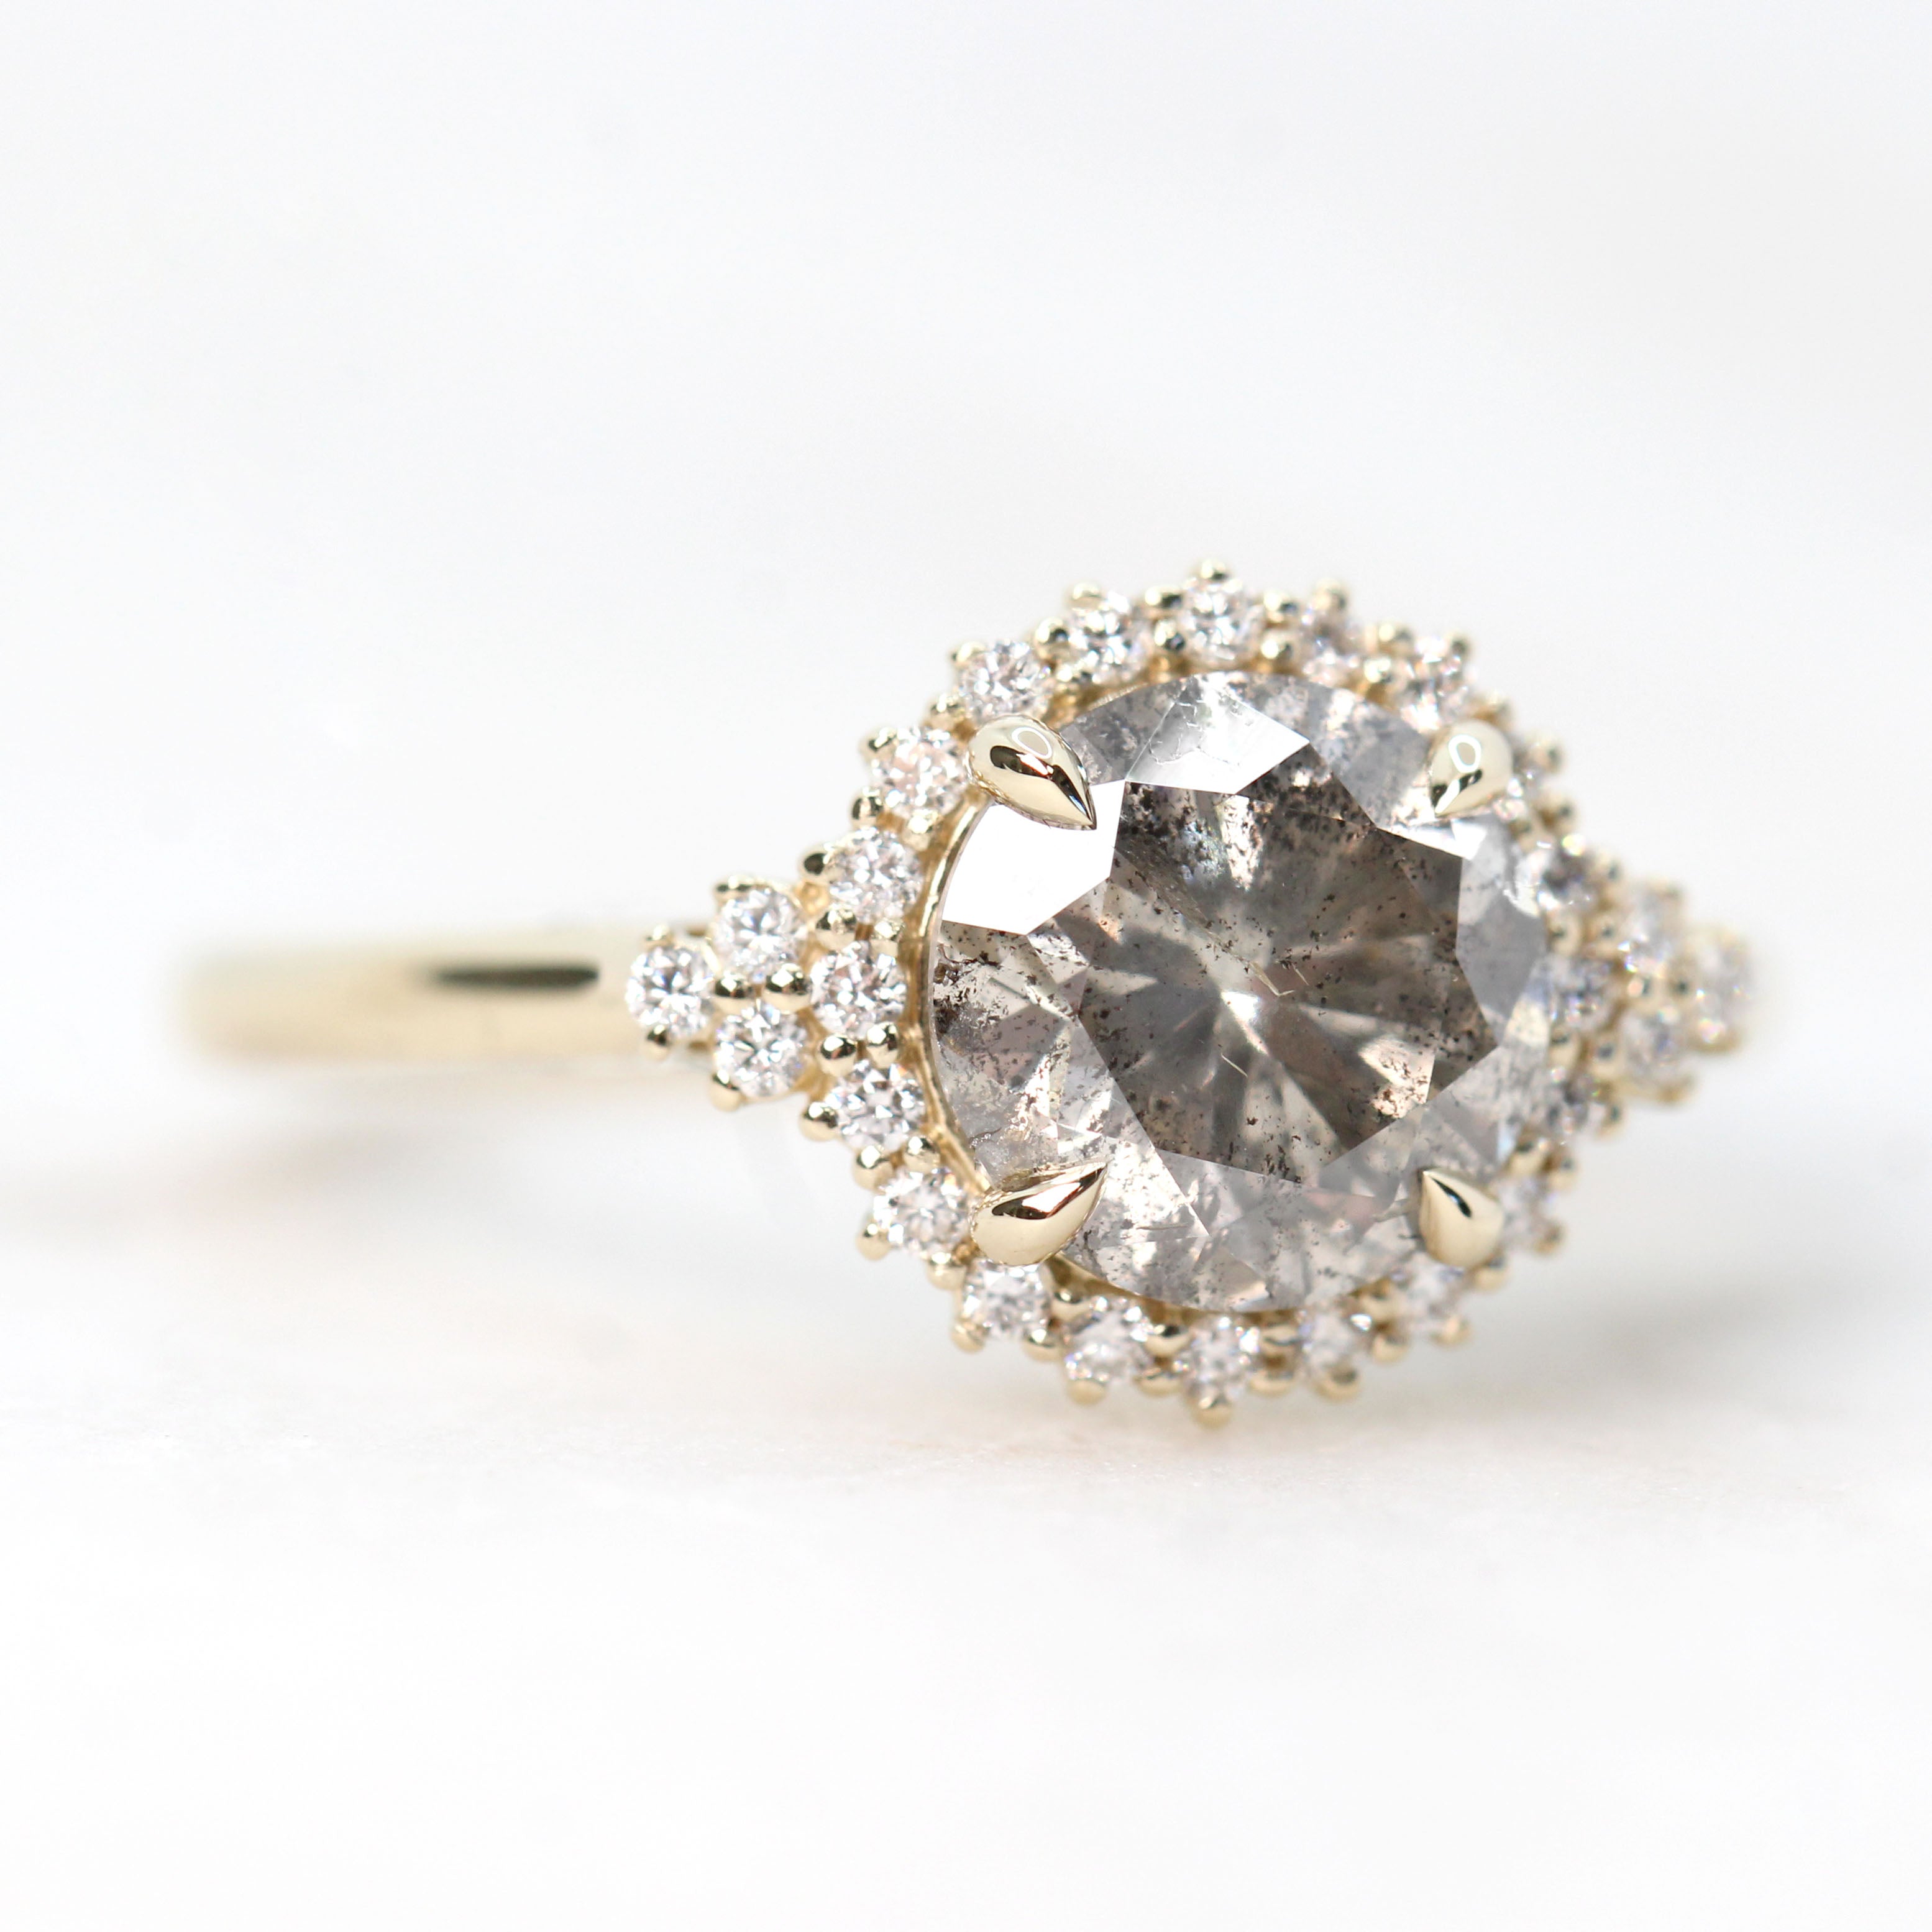 Nanette Ring with a 2.05 Carat Champagne Gray Round Celestial Diamond and White Accent Diamonds in 14k Yellow Gold - Ready to Size and Ship - Midwinter Co. Alternative Bridal Rings and Modern Fine Jewelry